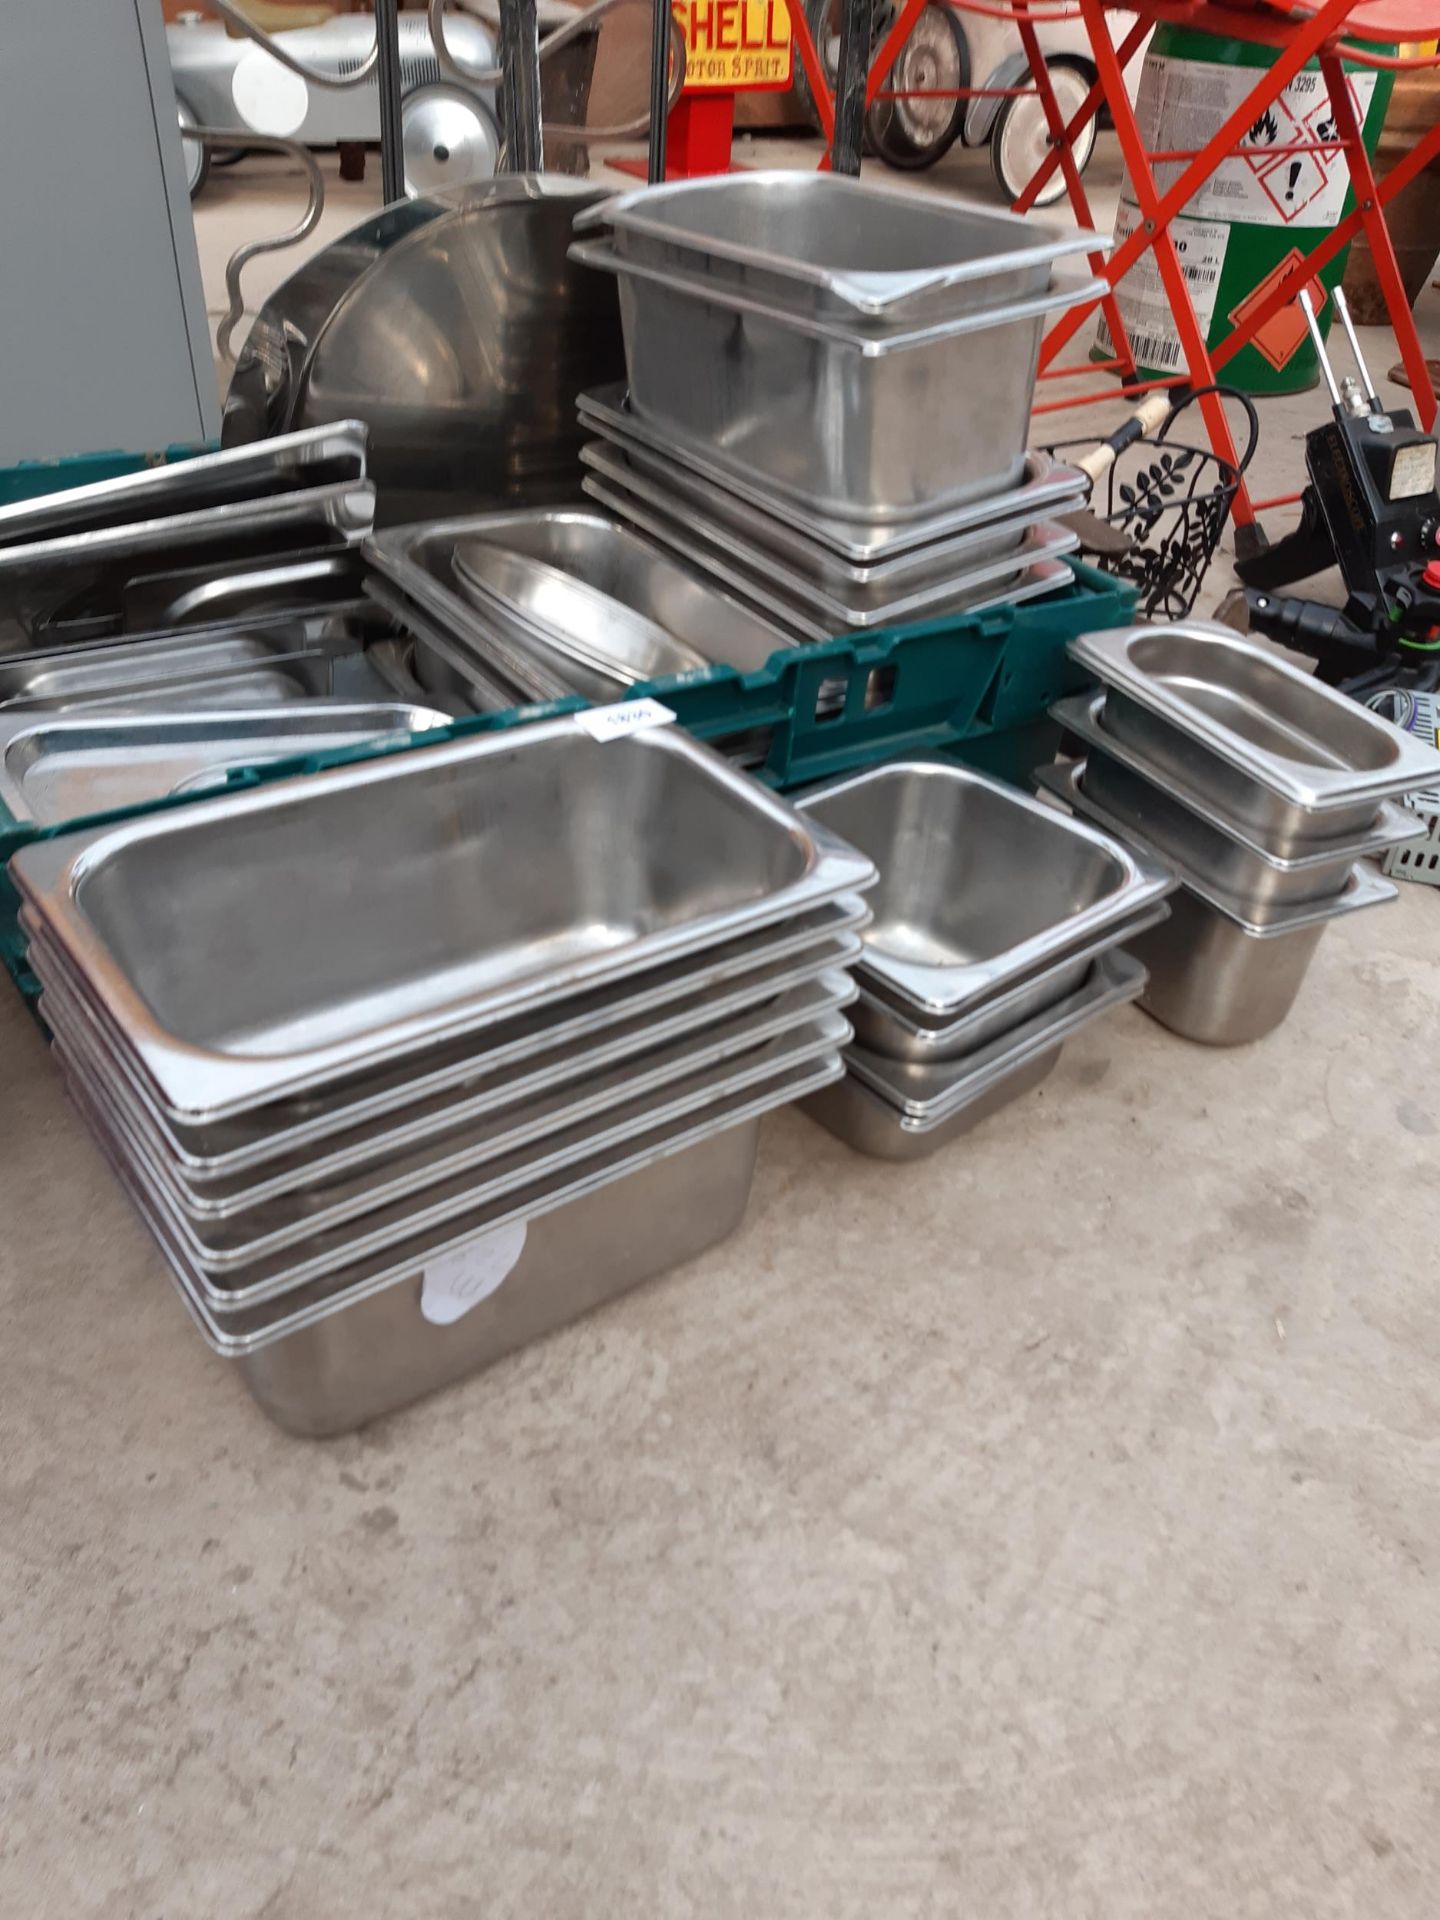 A LARGE QUANTITY OF STAINLESS STEEL KITCHEN ITEMS - Image 2 of 2